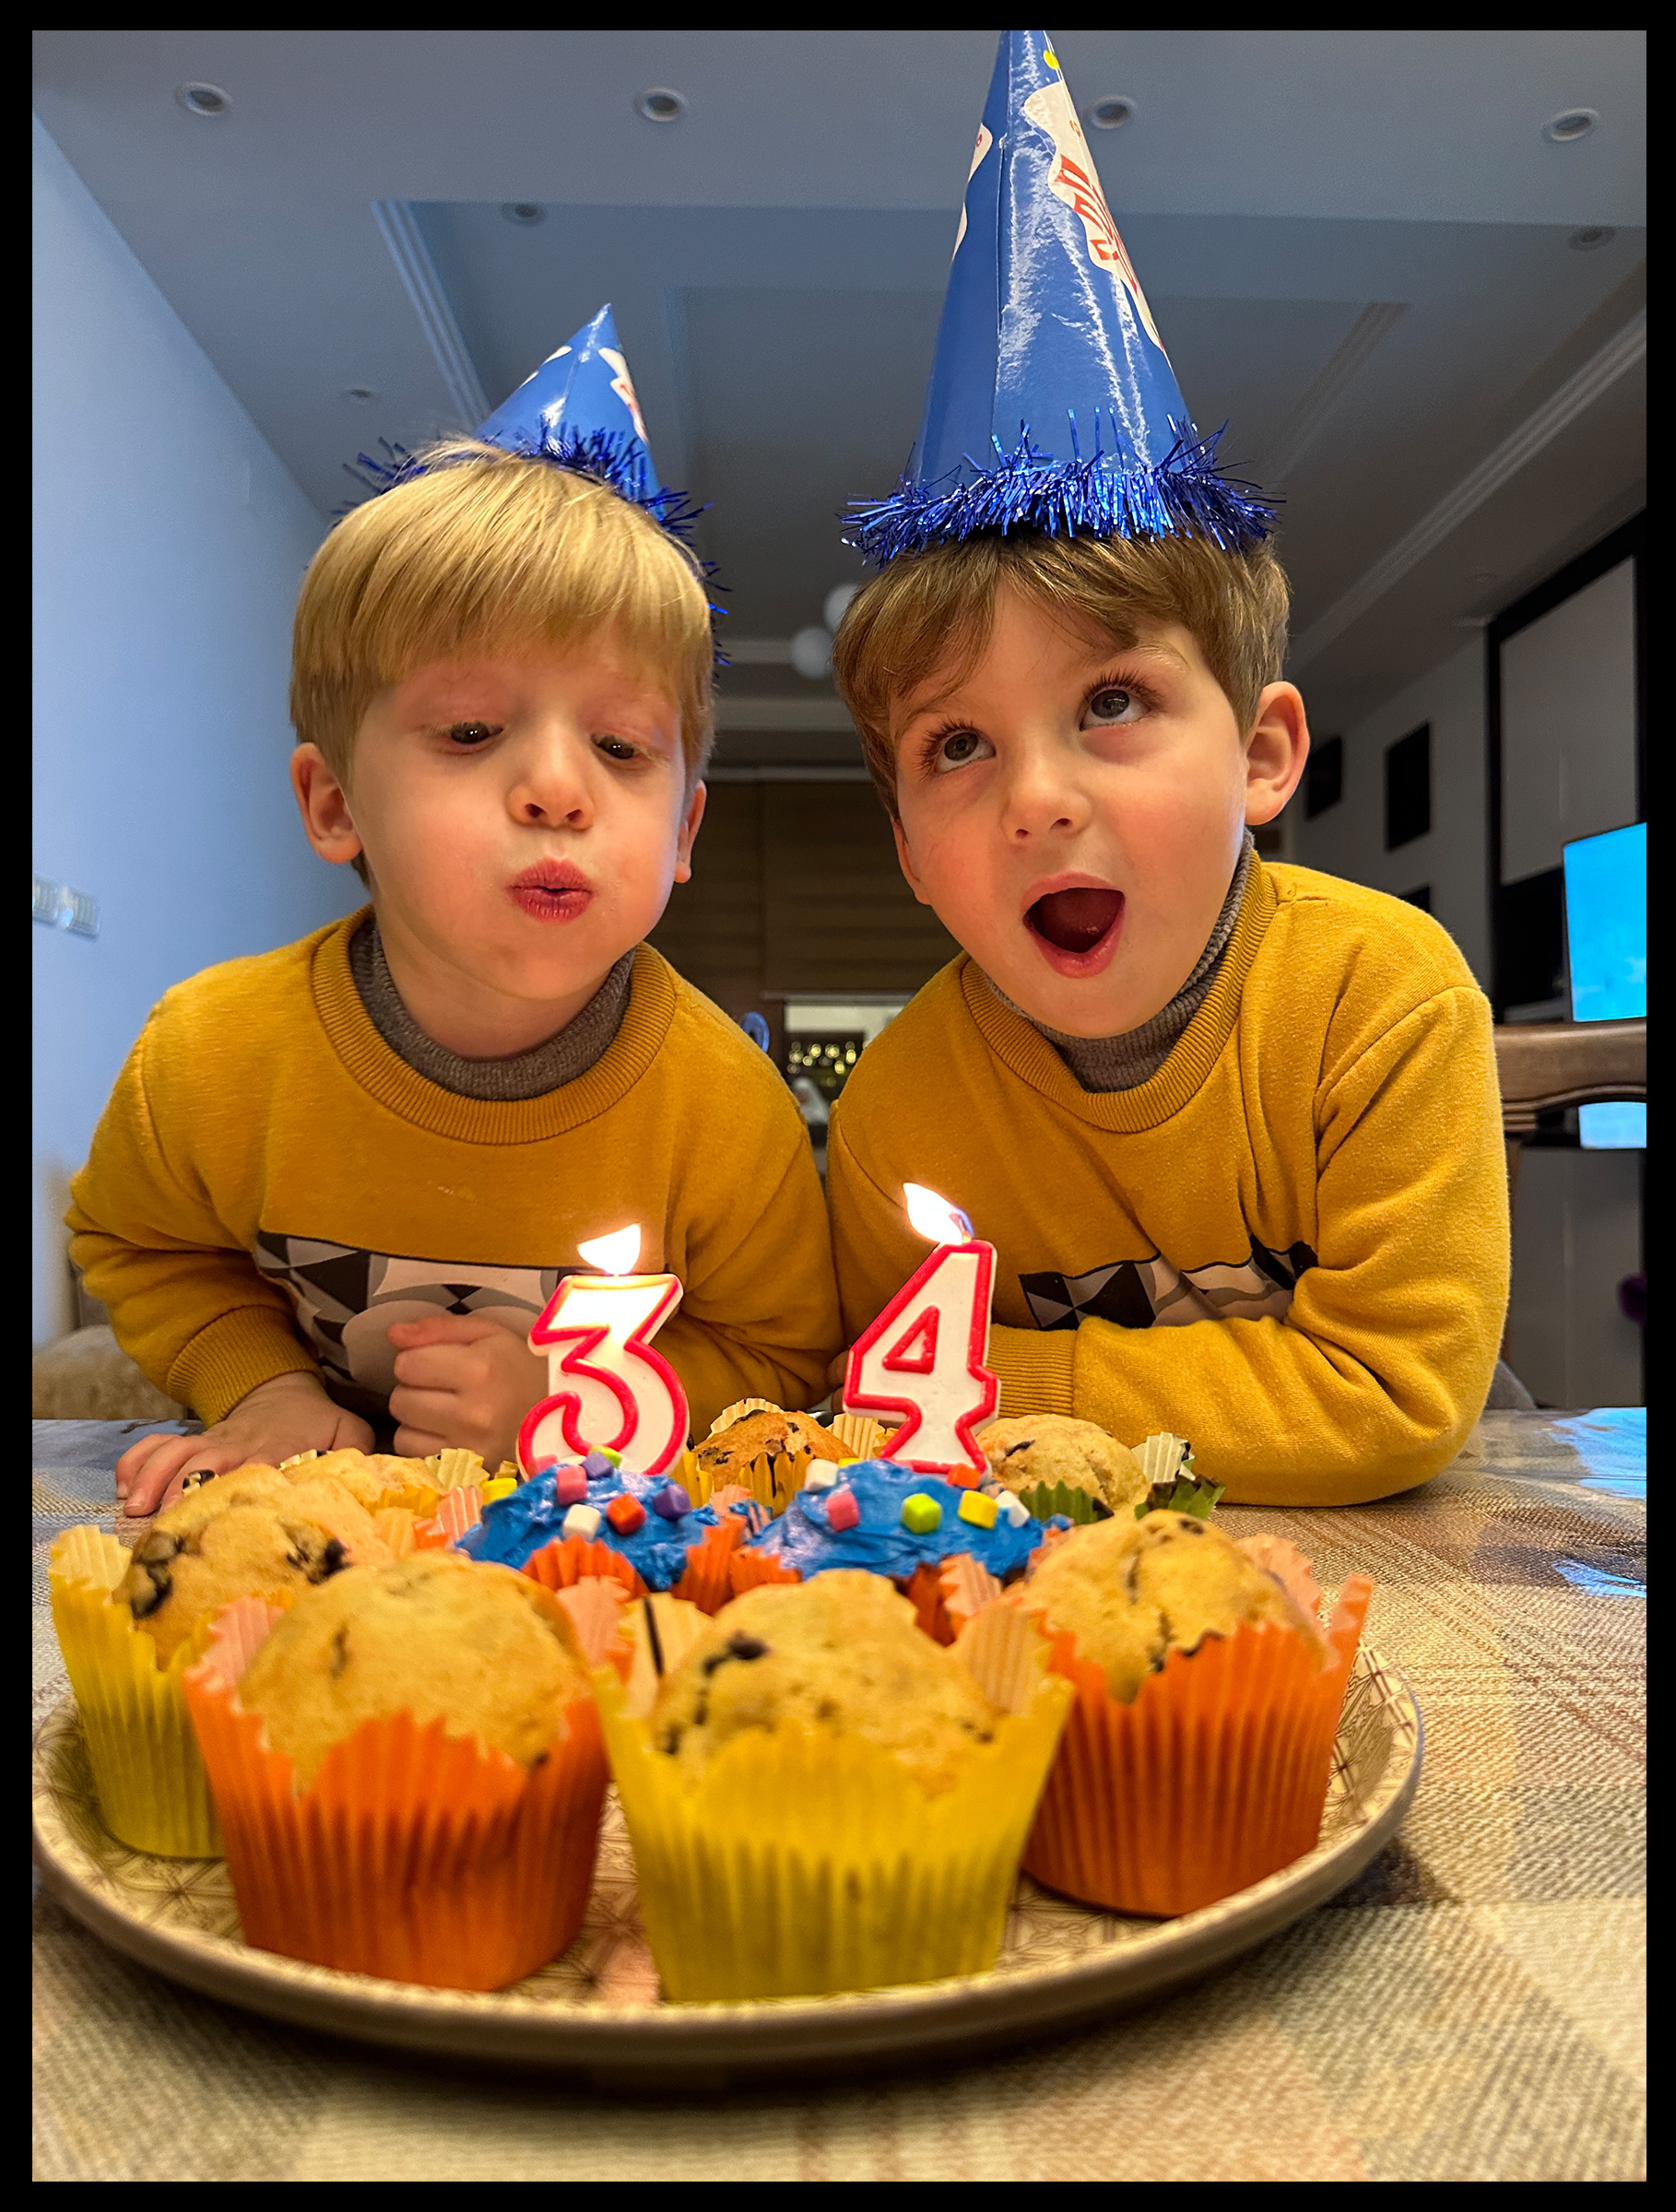 A picture of Zaid and Omar's last birthday party in March. Their birthdays are a week apart, which is why the family celebrates them on the same day.